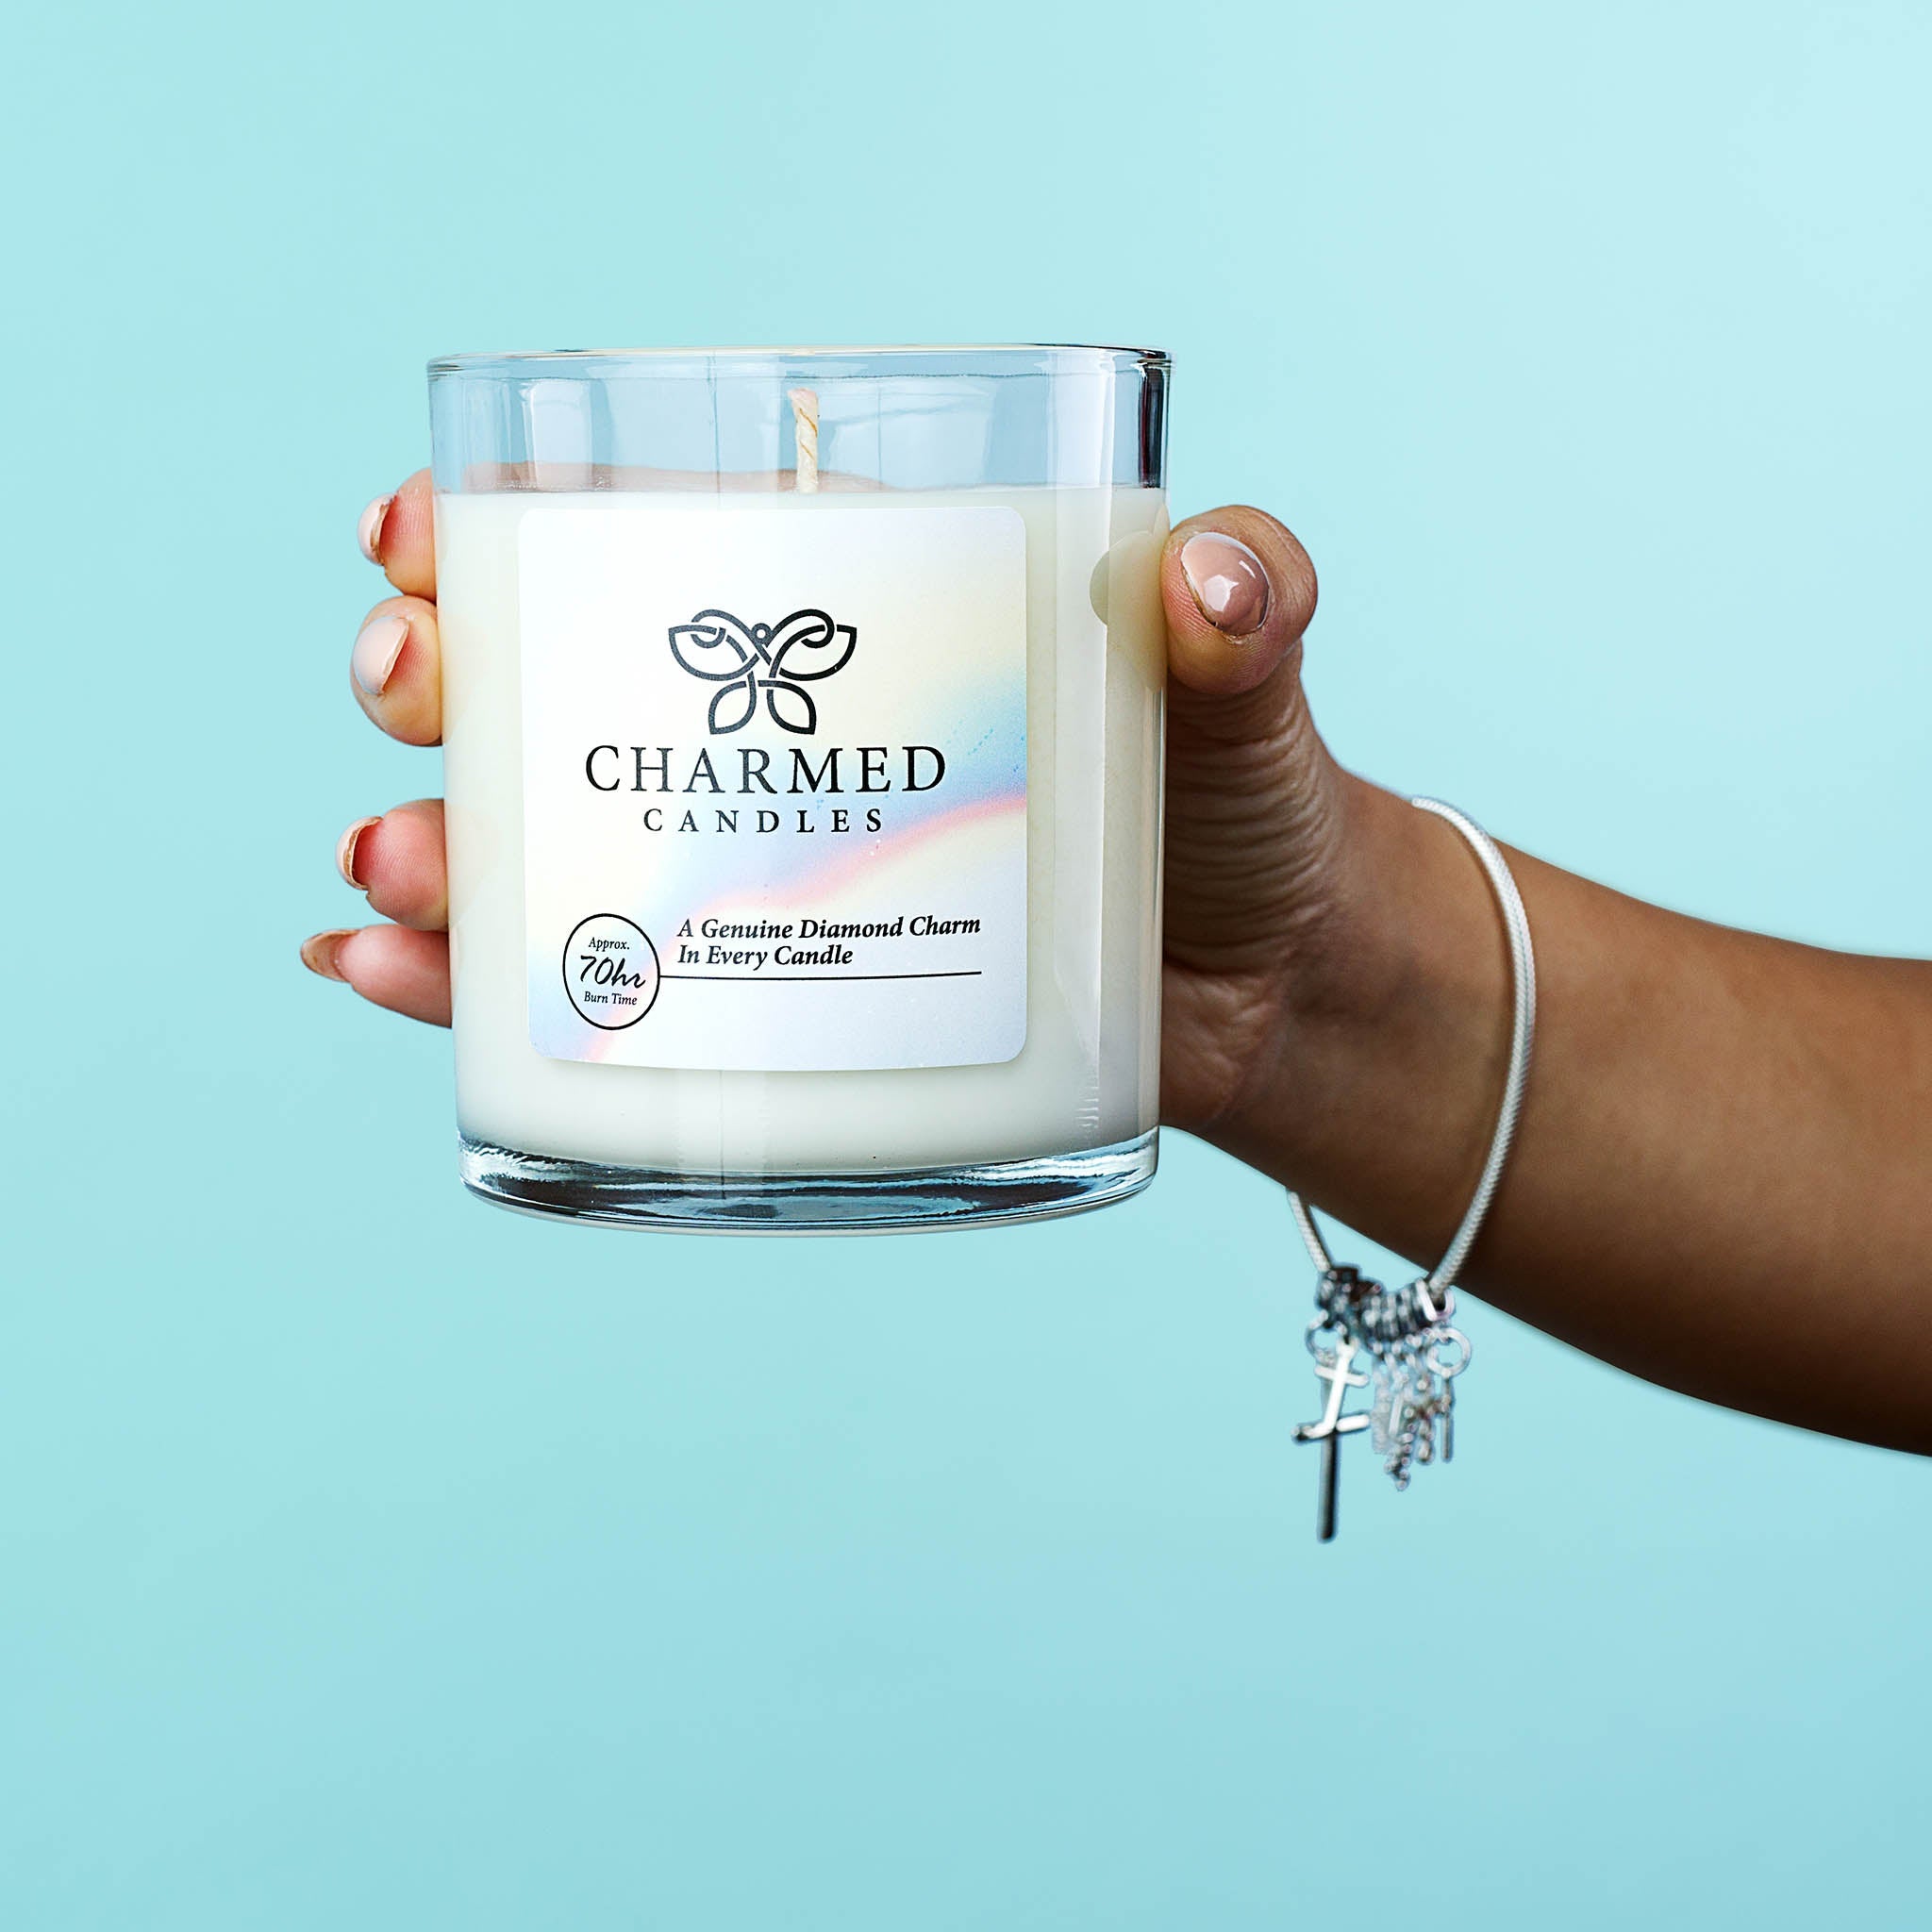 The Charmed Candle